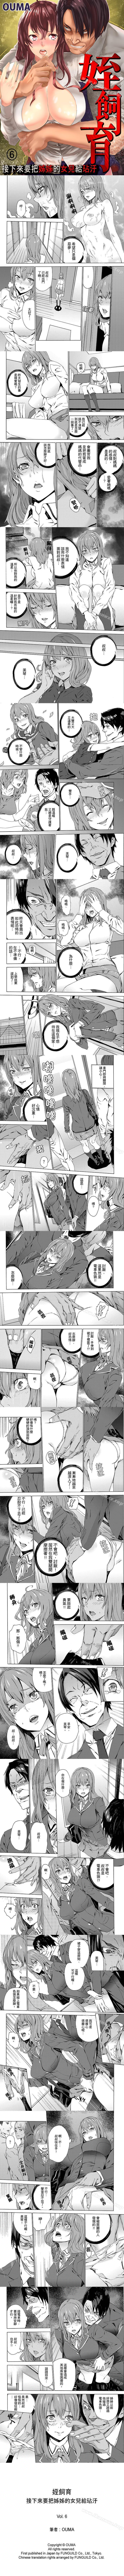 Chat 姪飼育 1-26 Climax - Page 6